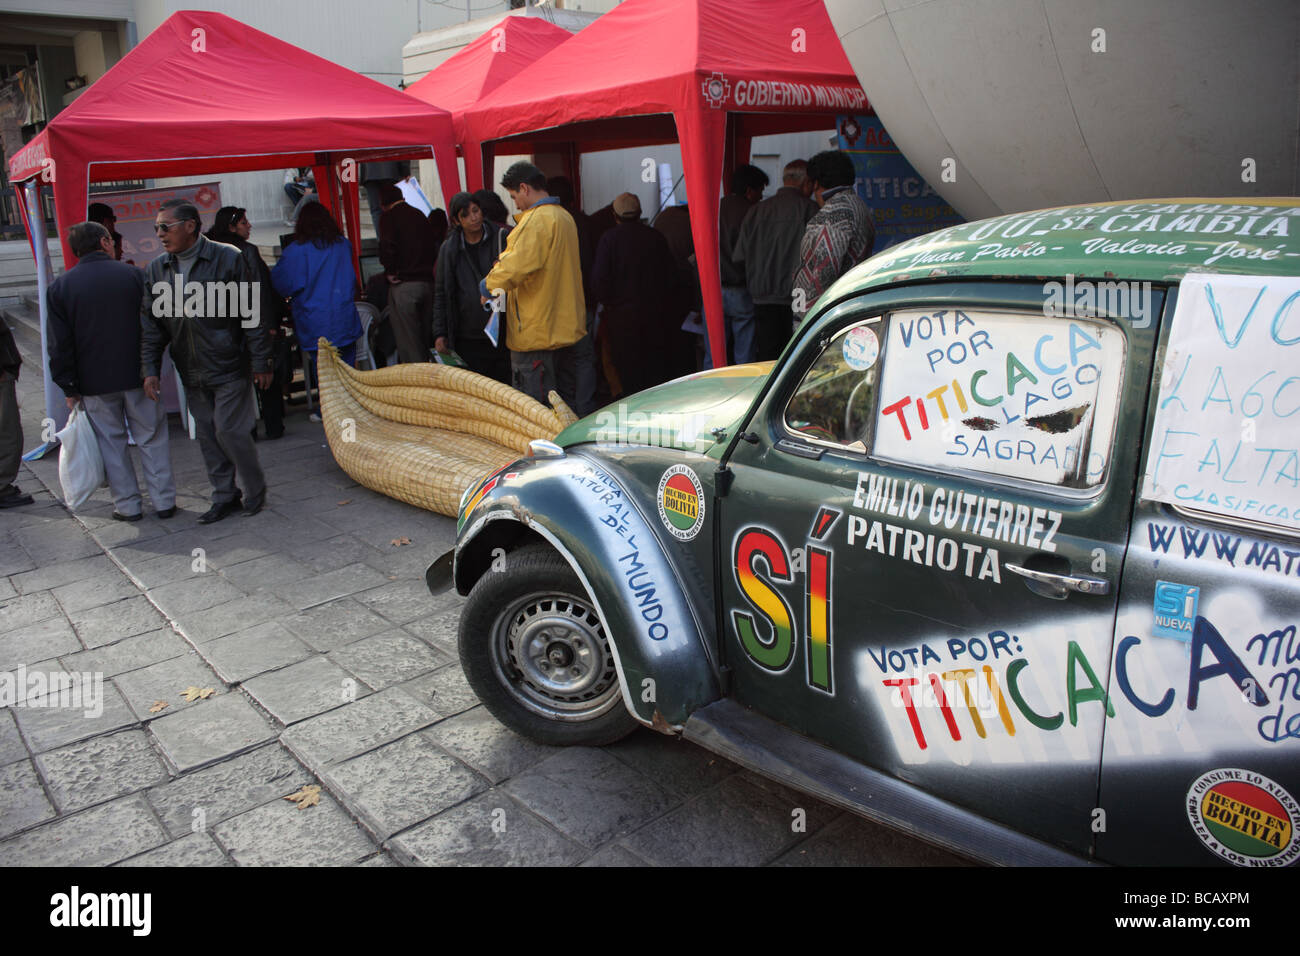 Painted Volkswagen Beetle, part of campaign for Lake Titicaca as one of The Seven Natural Wonders of the World, La Paz, Bolivia Stock Photo